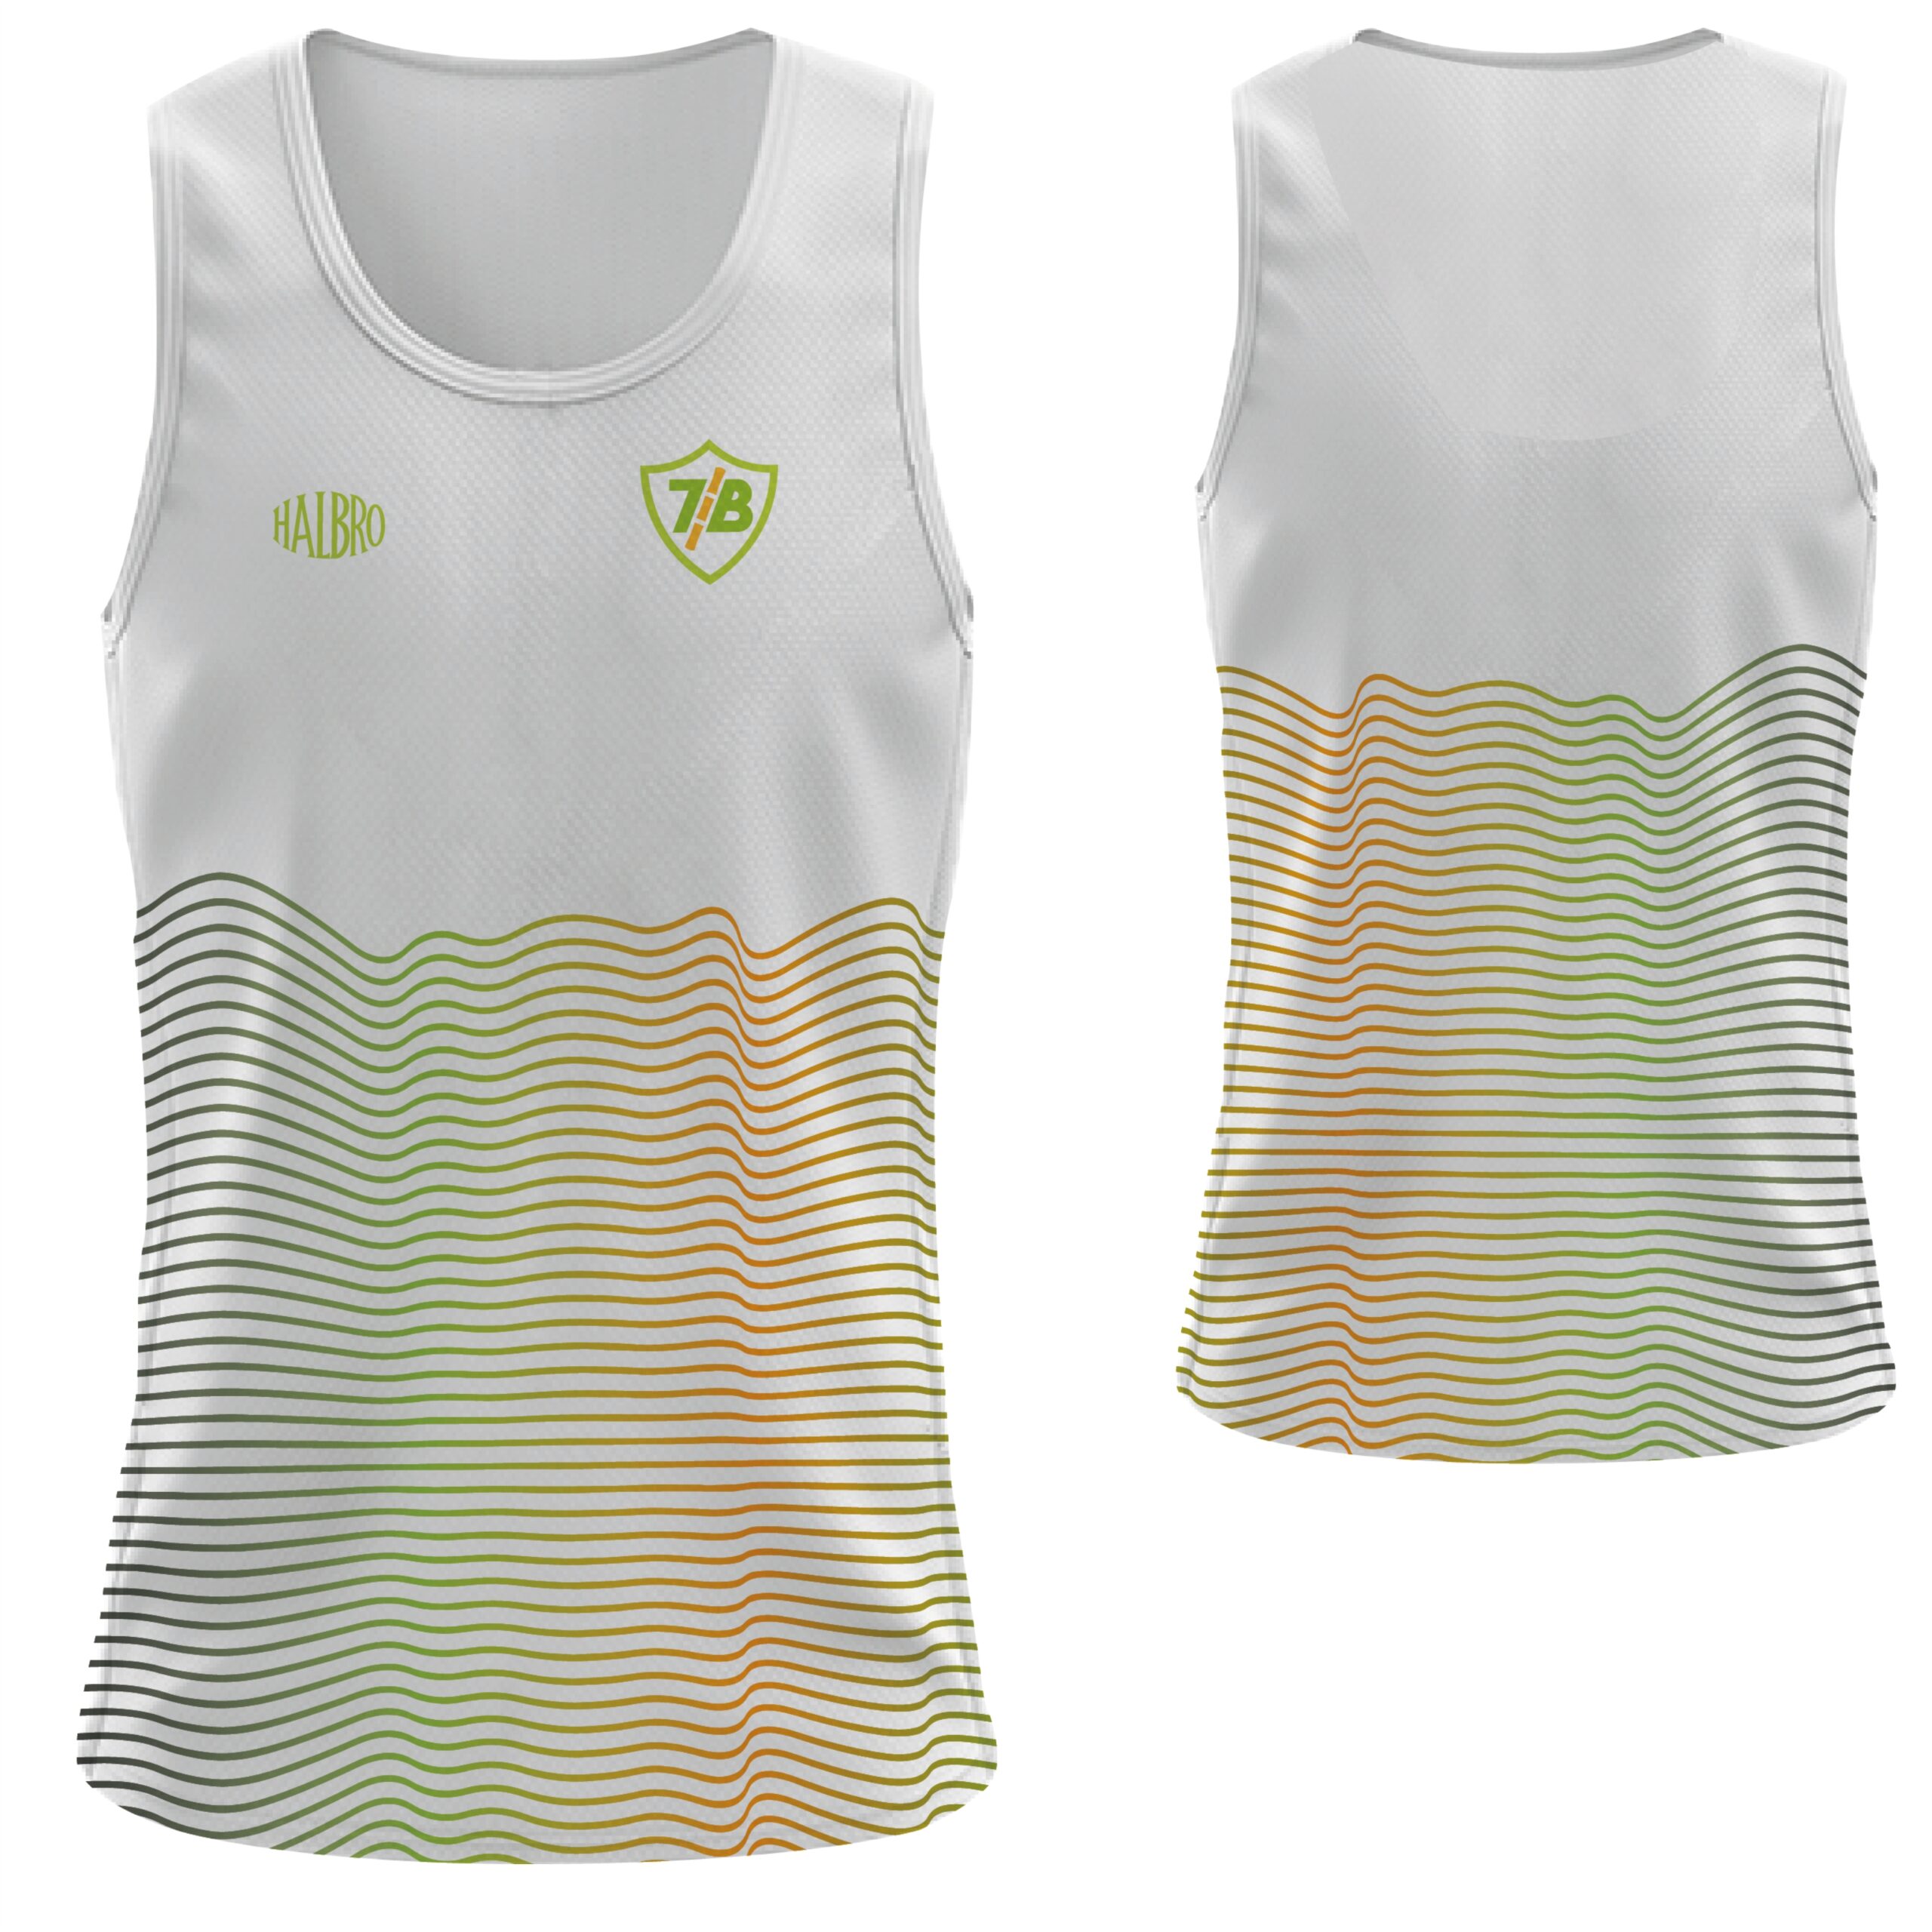 7 Bamboos Rugby Sublimated Vest - Halbro Sportswear Limited